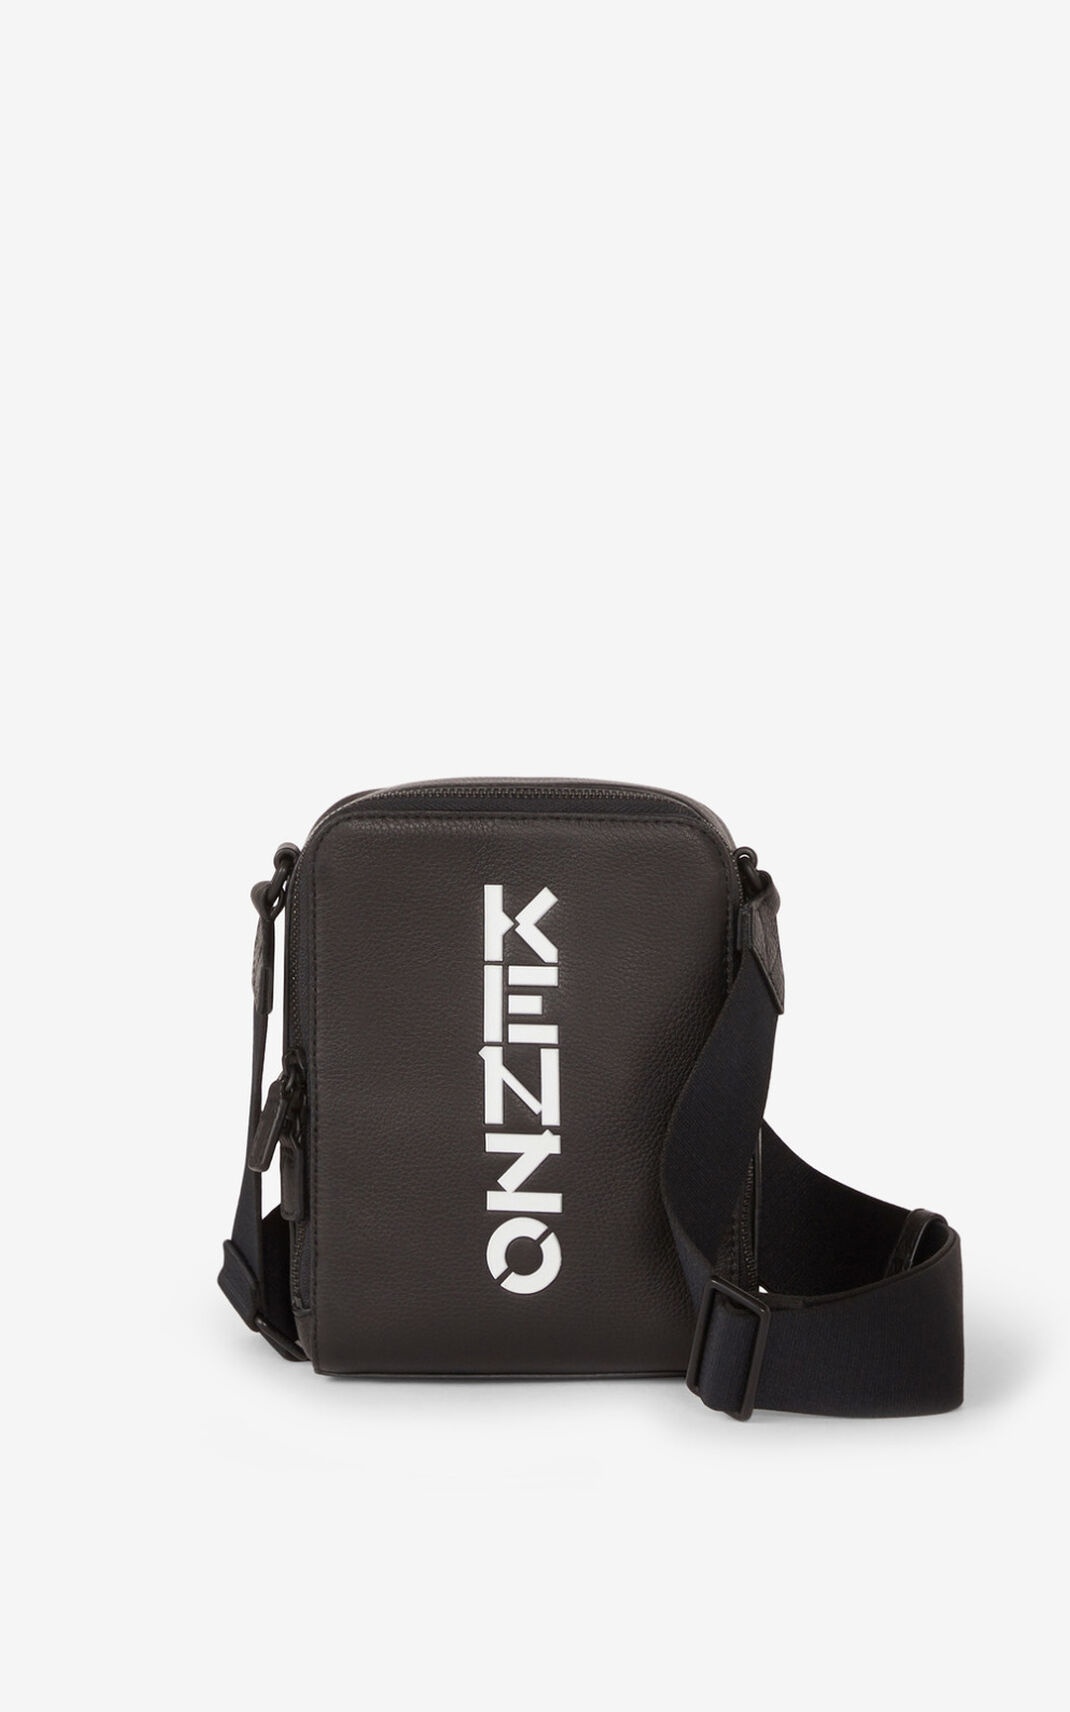 KENZO Logo leather bag with strap - 1